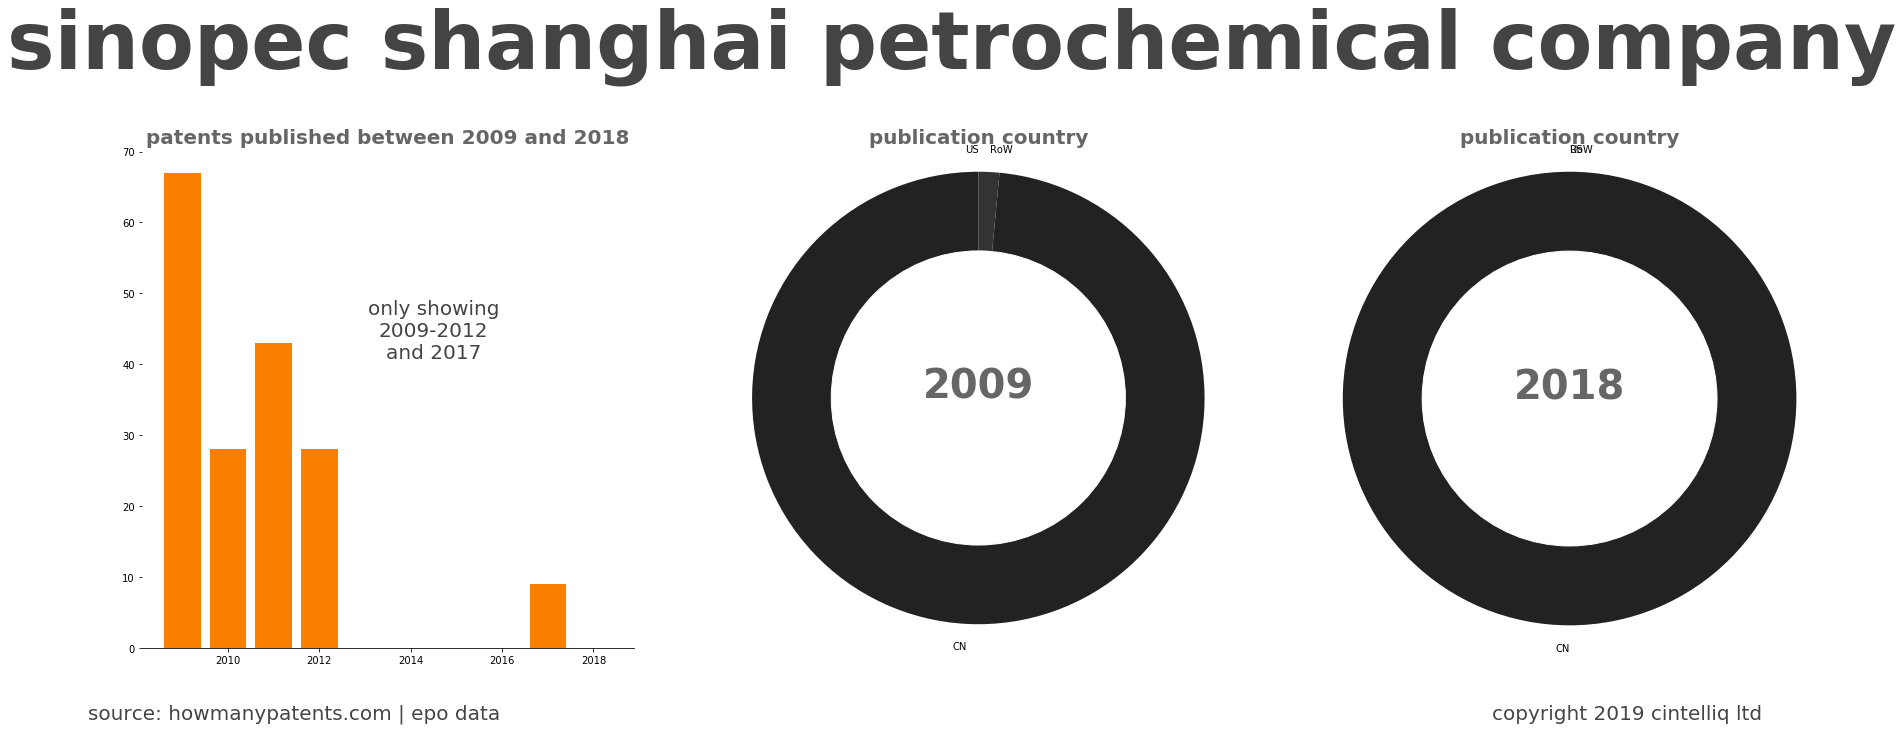 summary of patents for Sinopec Shanghai Petrochemical Company